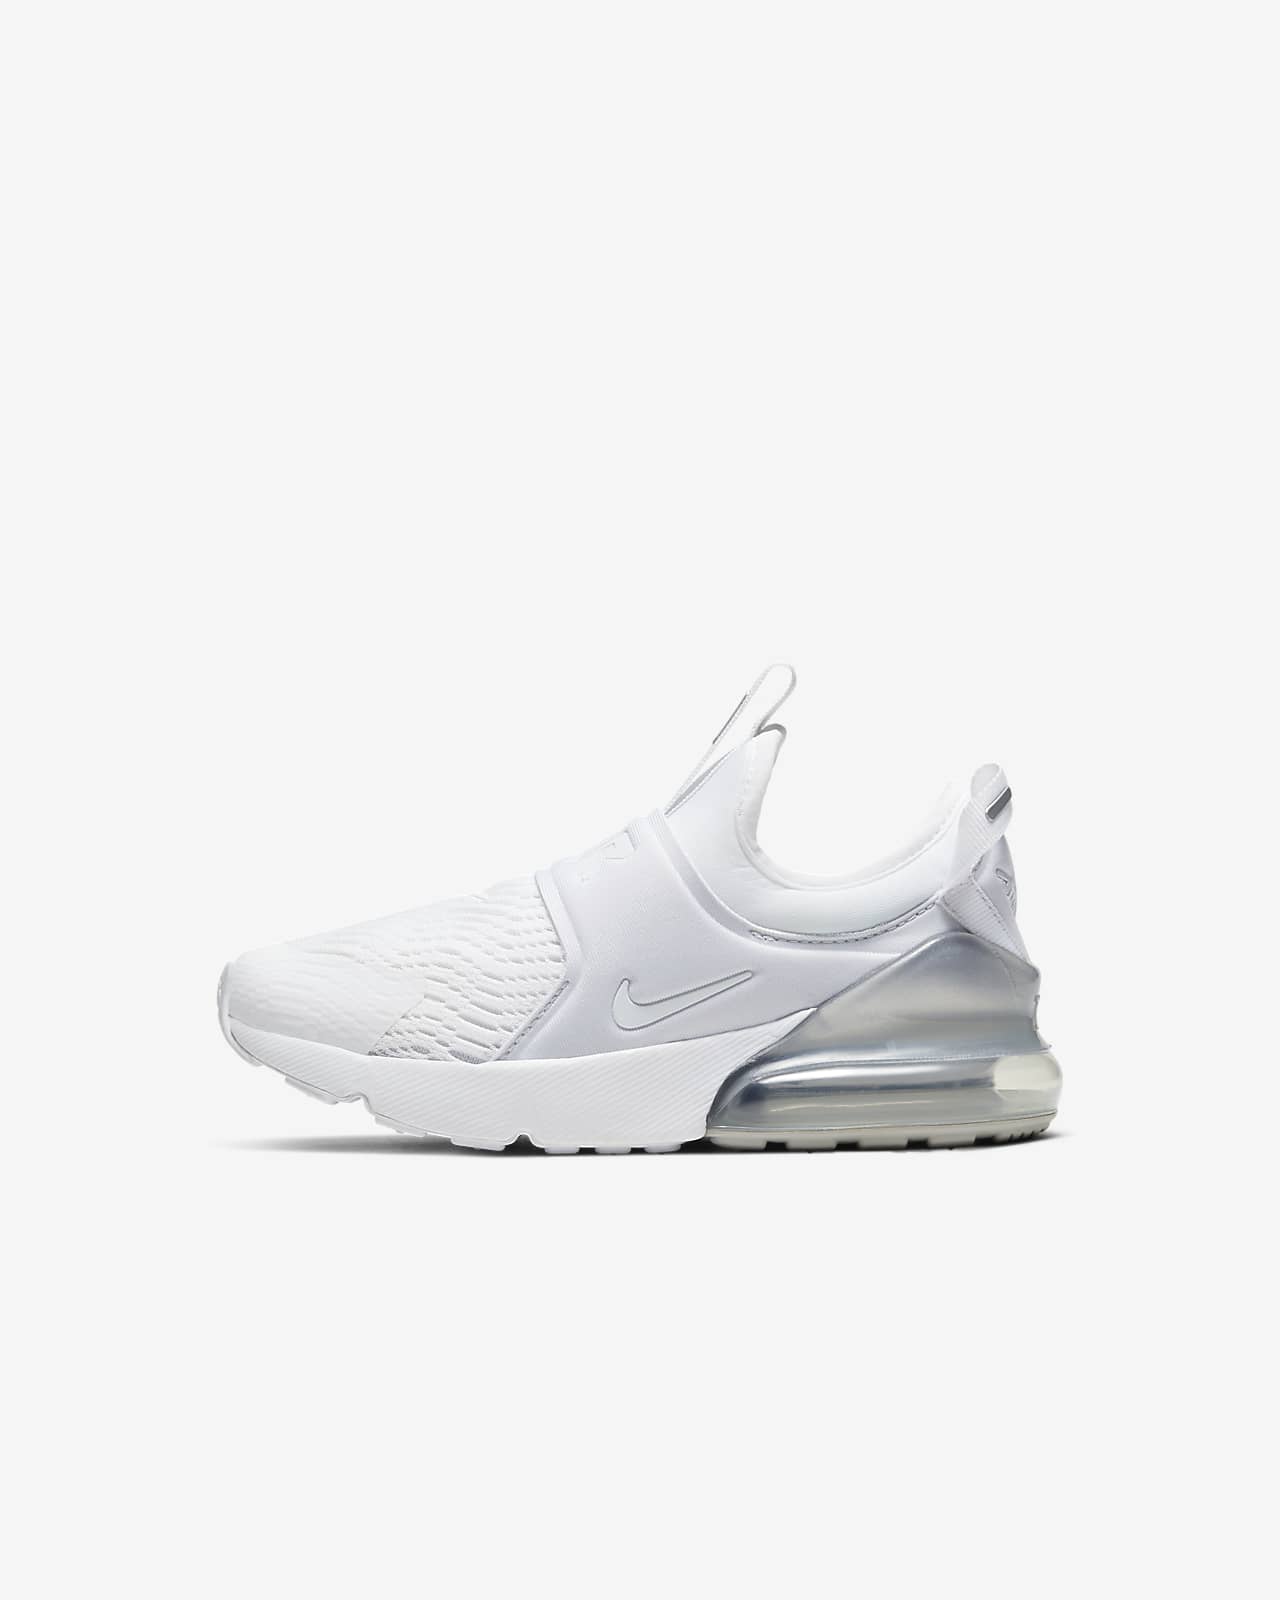 Nike Air Max 270 Extreme (PS) 幼童运动童鞋